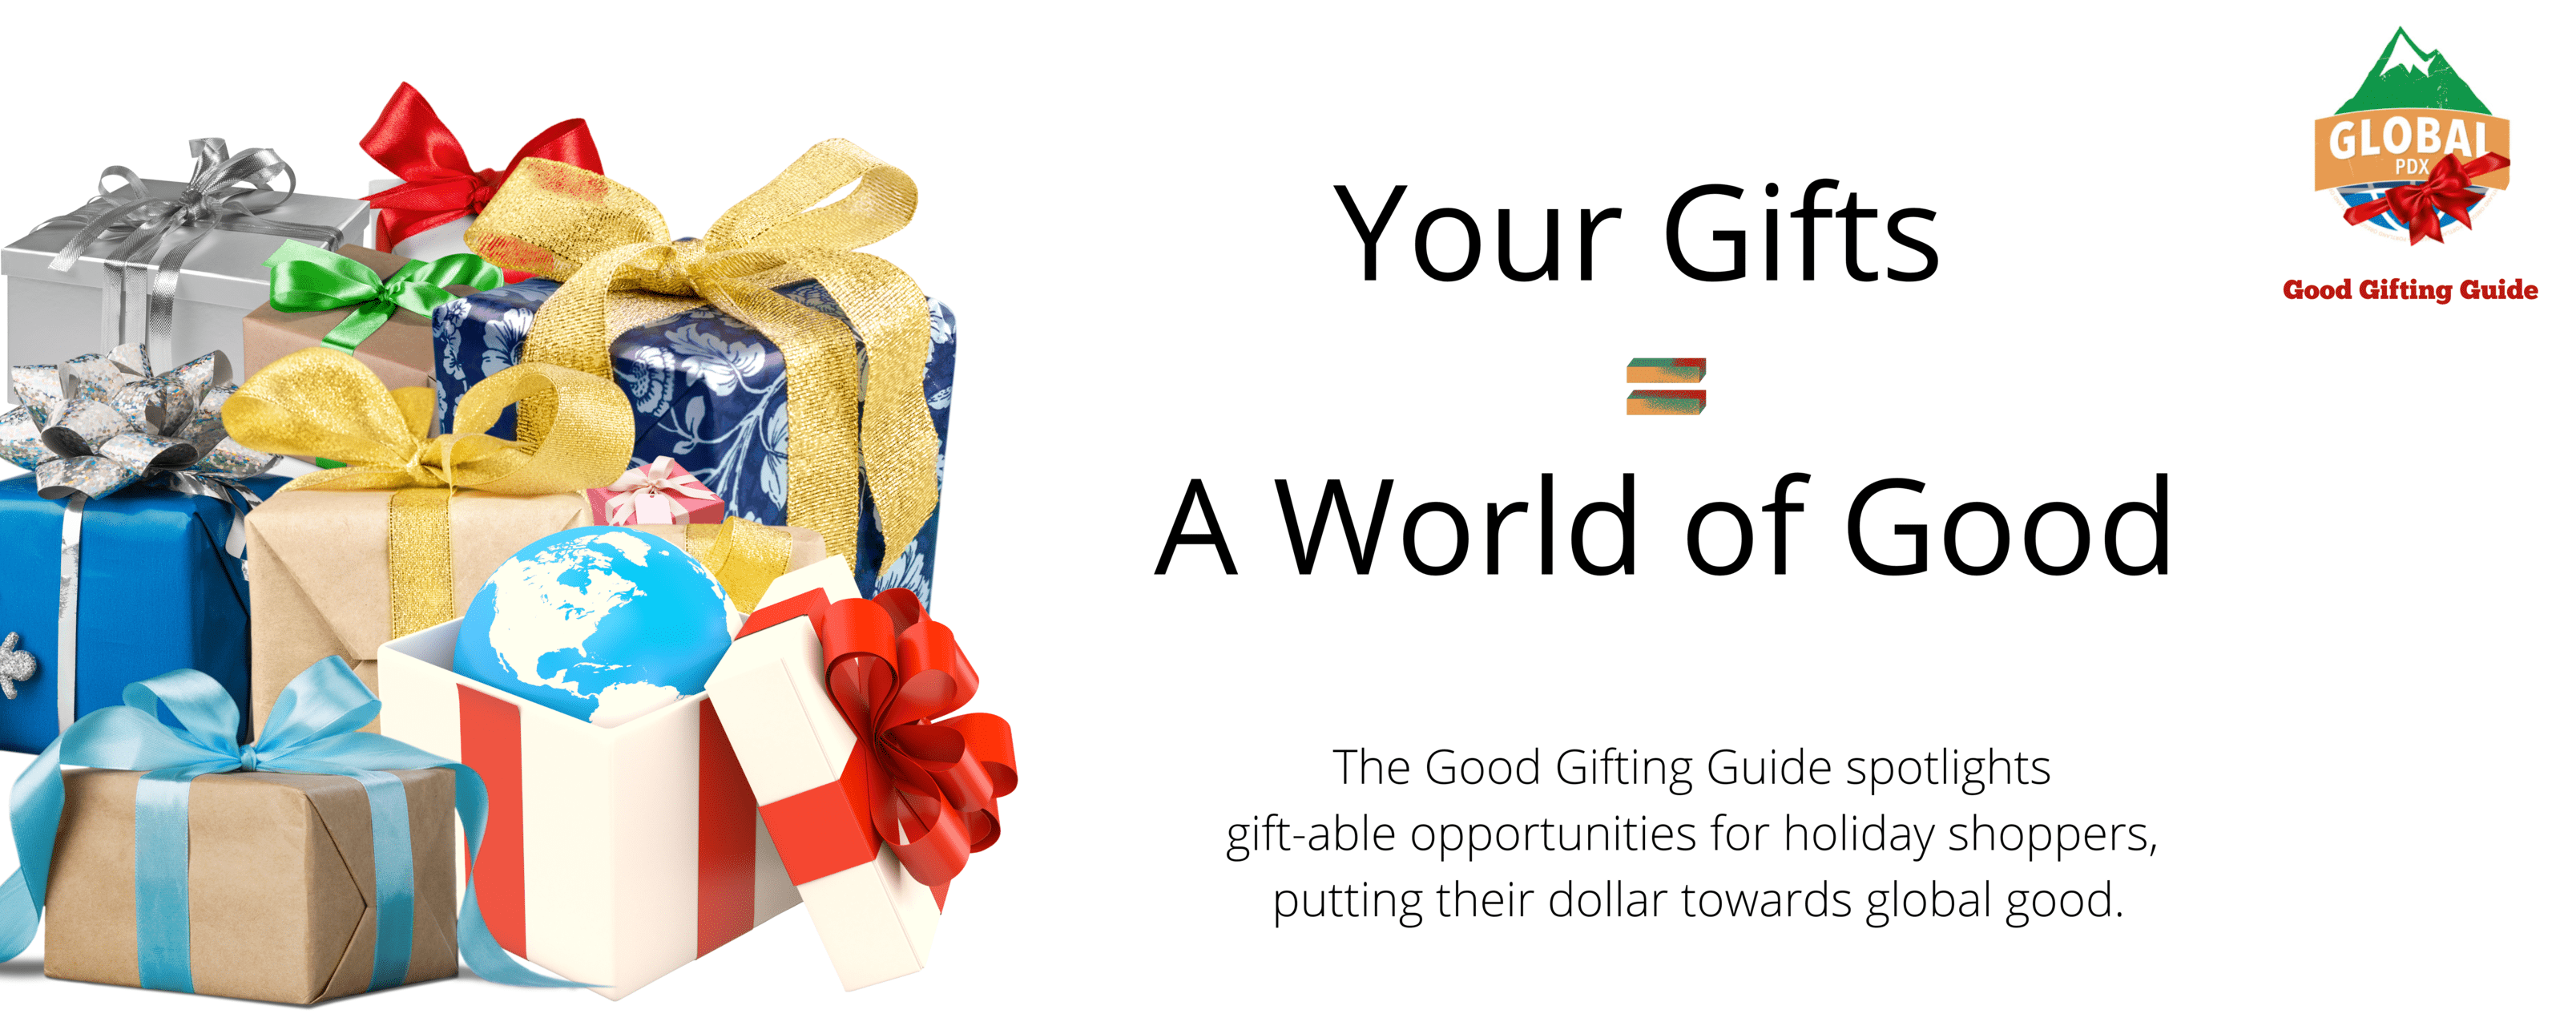 Your Gift = a world of good (75.342 × 36 in)